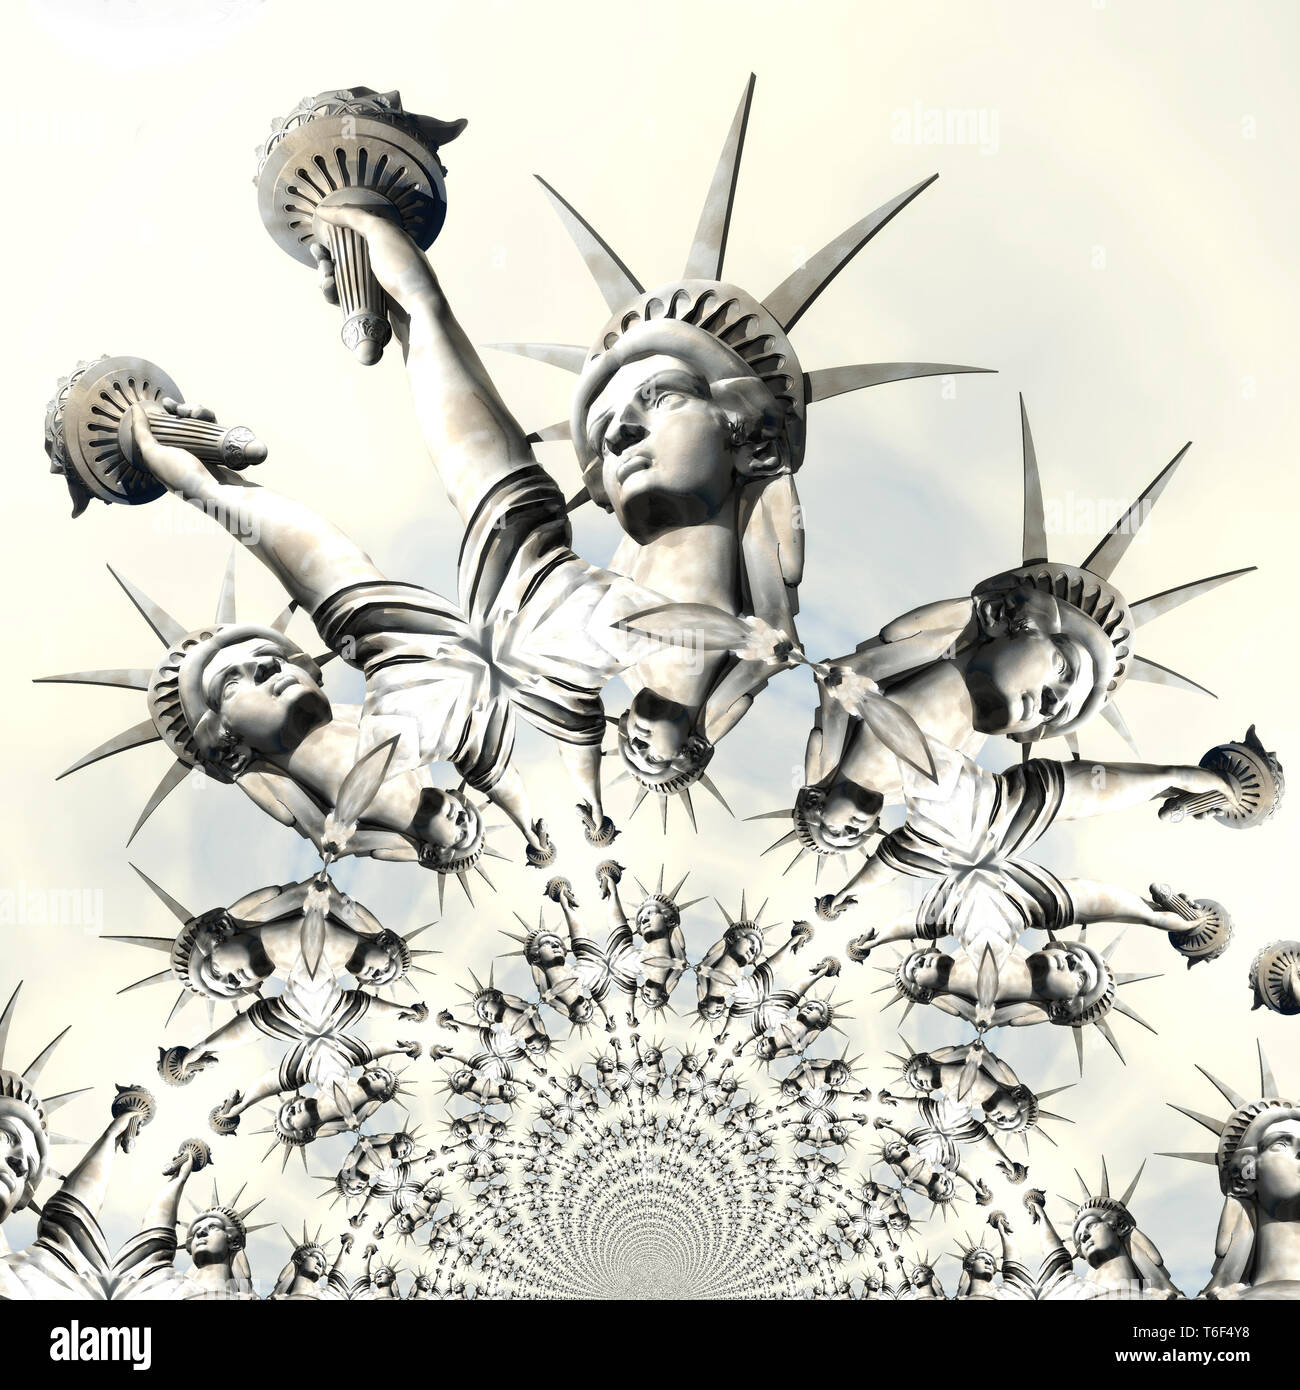 3D Rendering, 3D Illustration of the Statue of Liberty Stock Photo